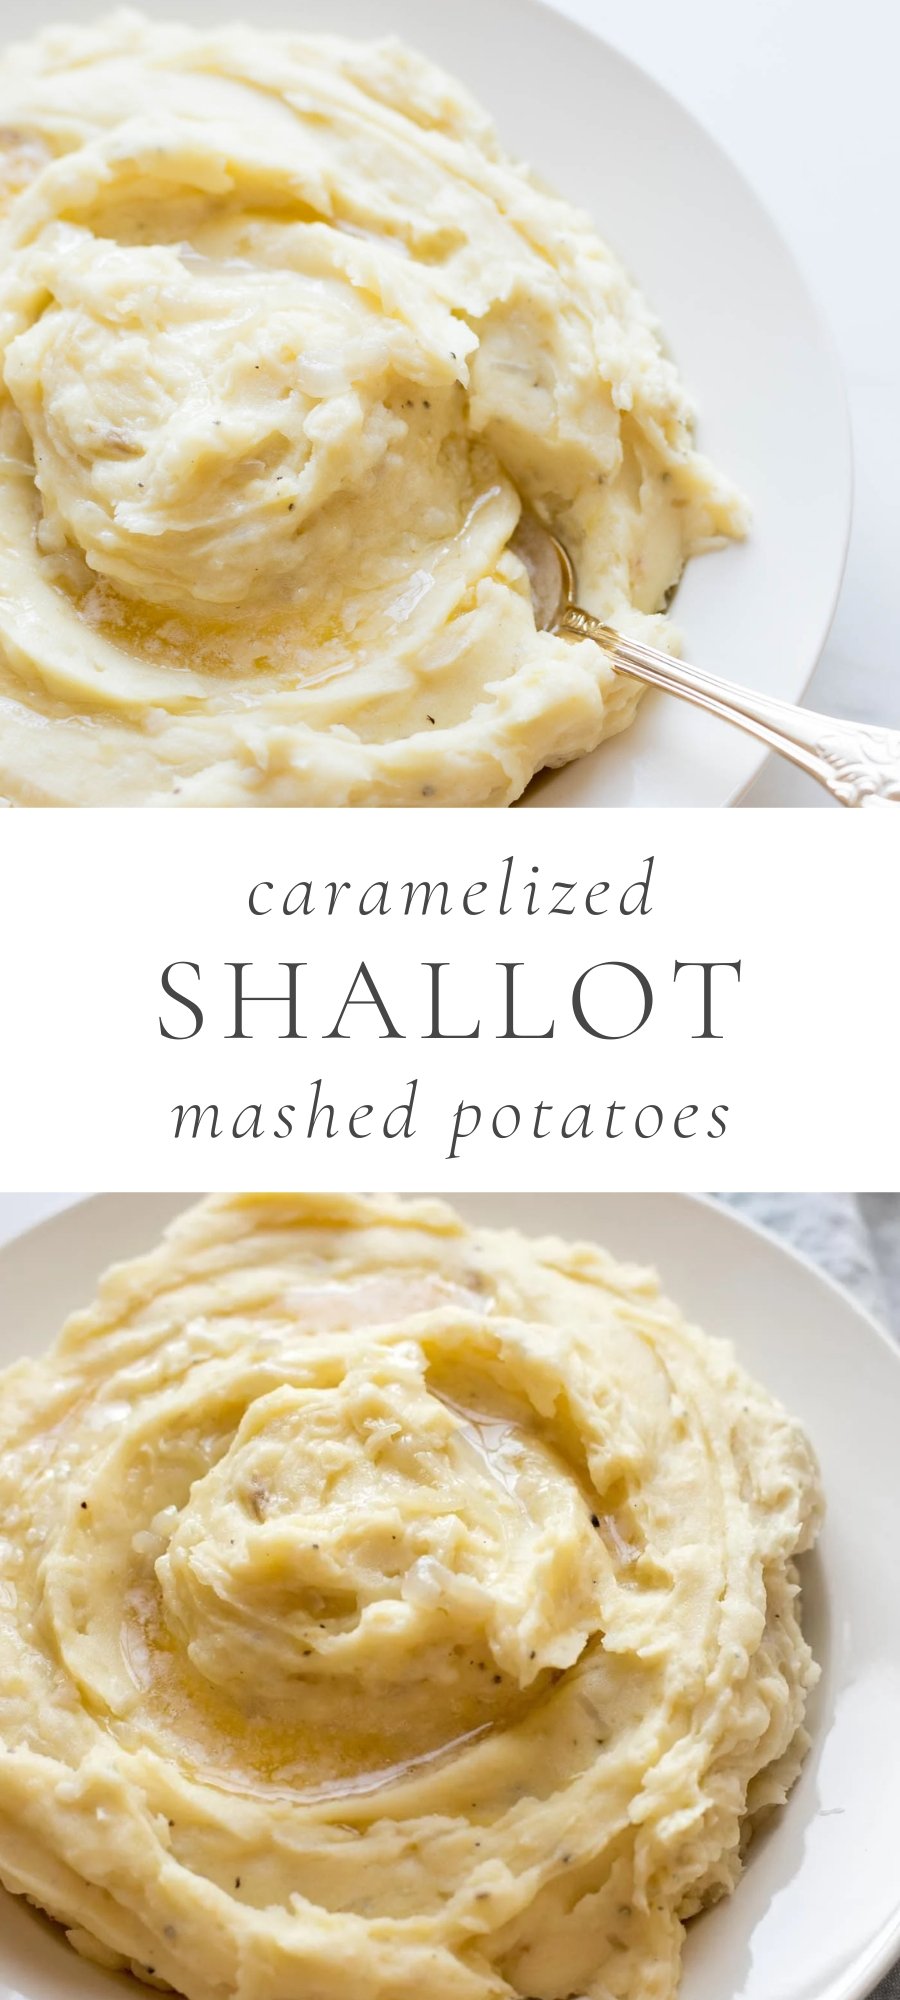 Caramelized Shallot Mashed Potatoes in white plate